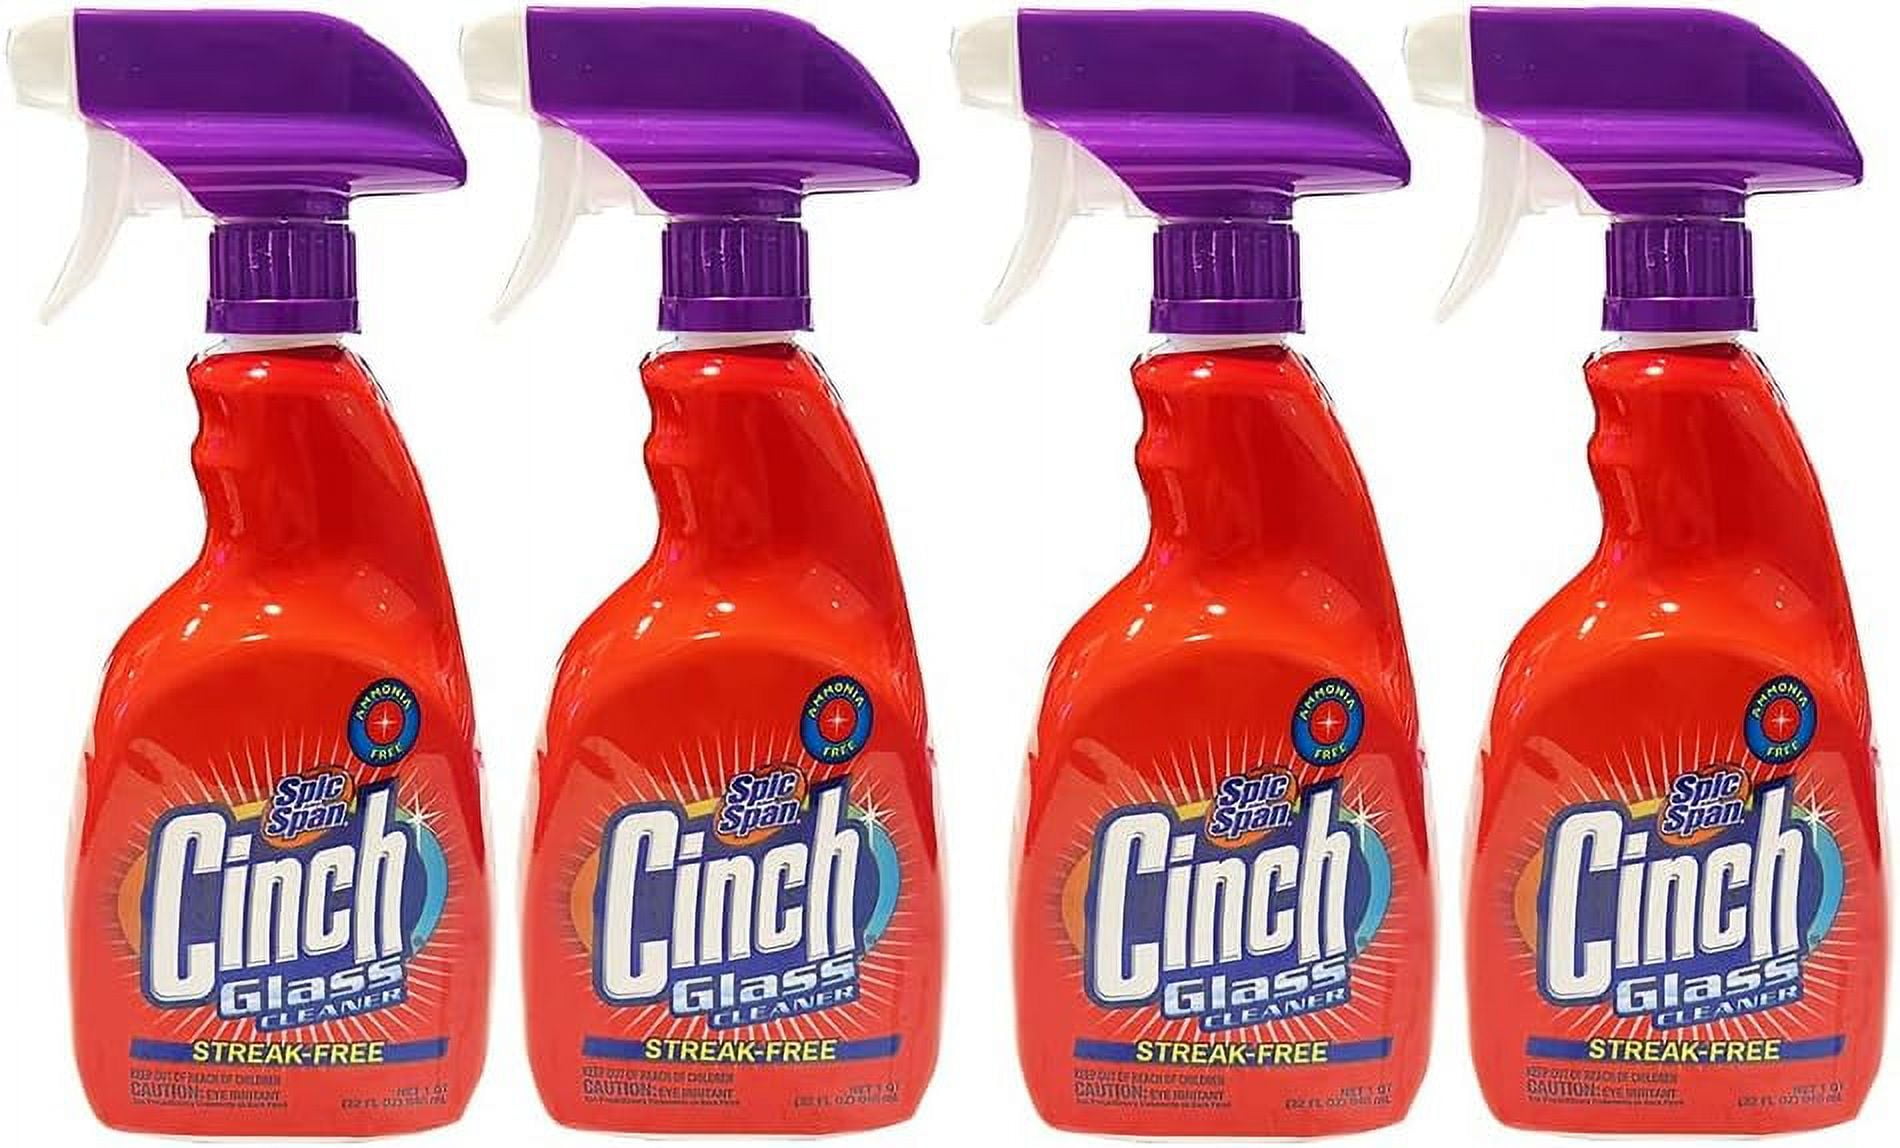 Cinch Glass Cleaner. IS THIS THE ONE WE HAVE BEEN SEARCHING FOR?!?!?! 